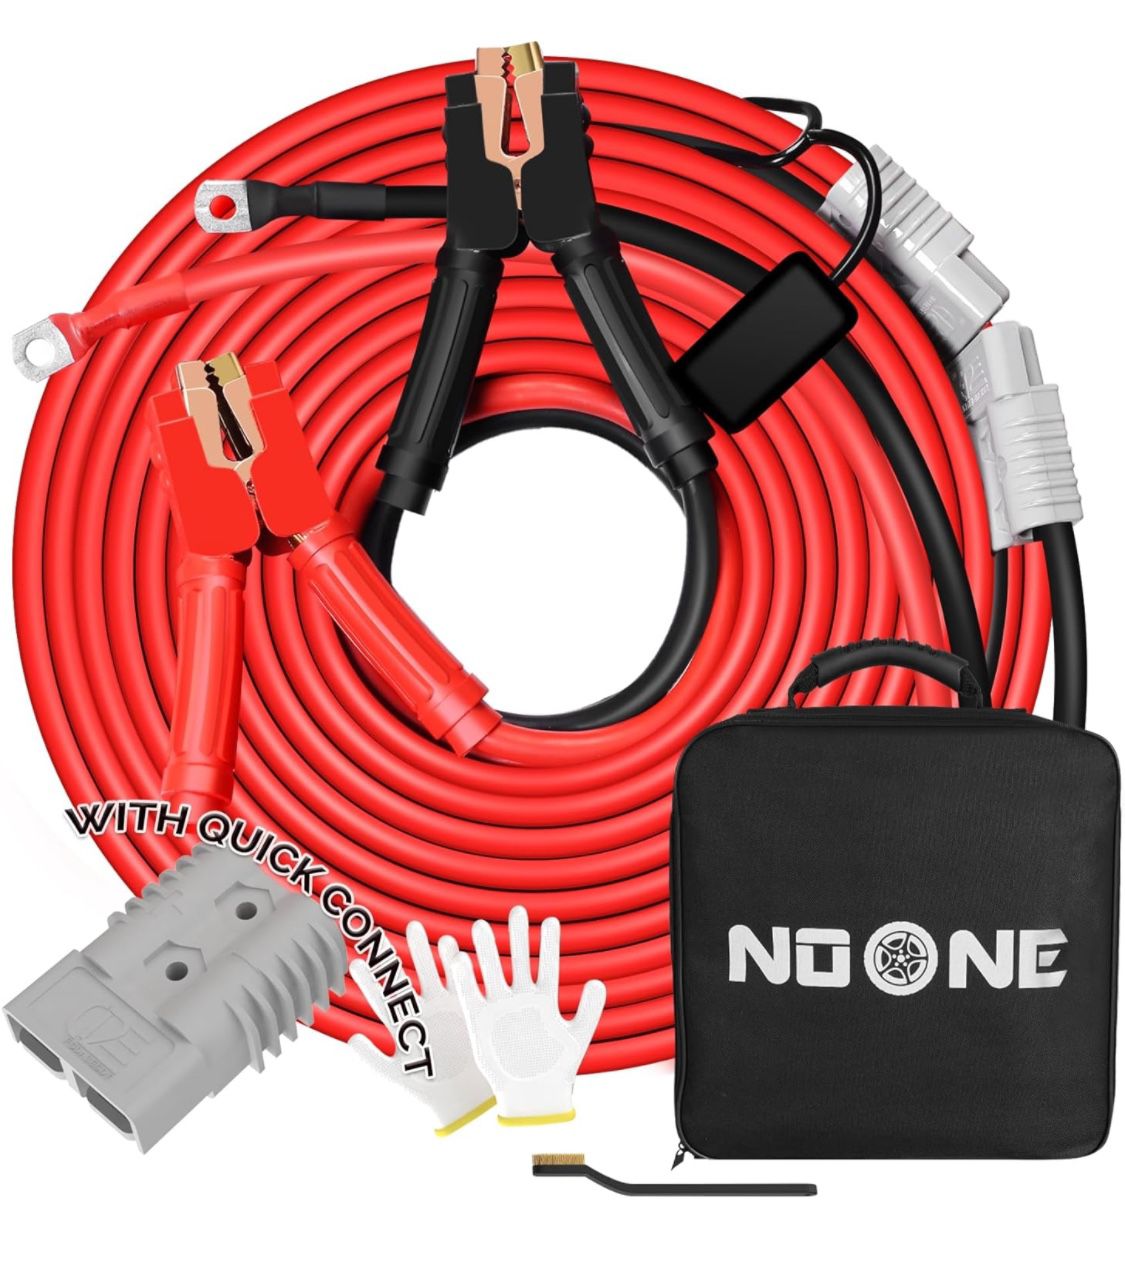 NOONE Booster Jumper Cables Heavy Duty 2/0 Gauge 30 FT 1500 AMP with Quick Connect Plugs for Truck SUV Car with up to 8-Liter Gasoline